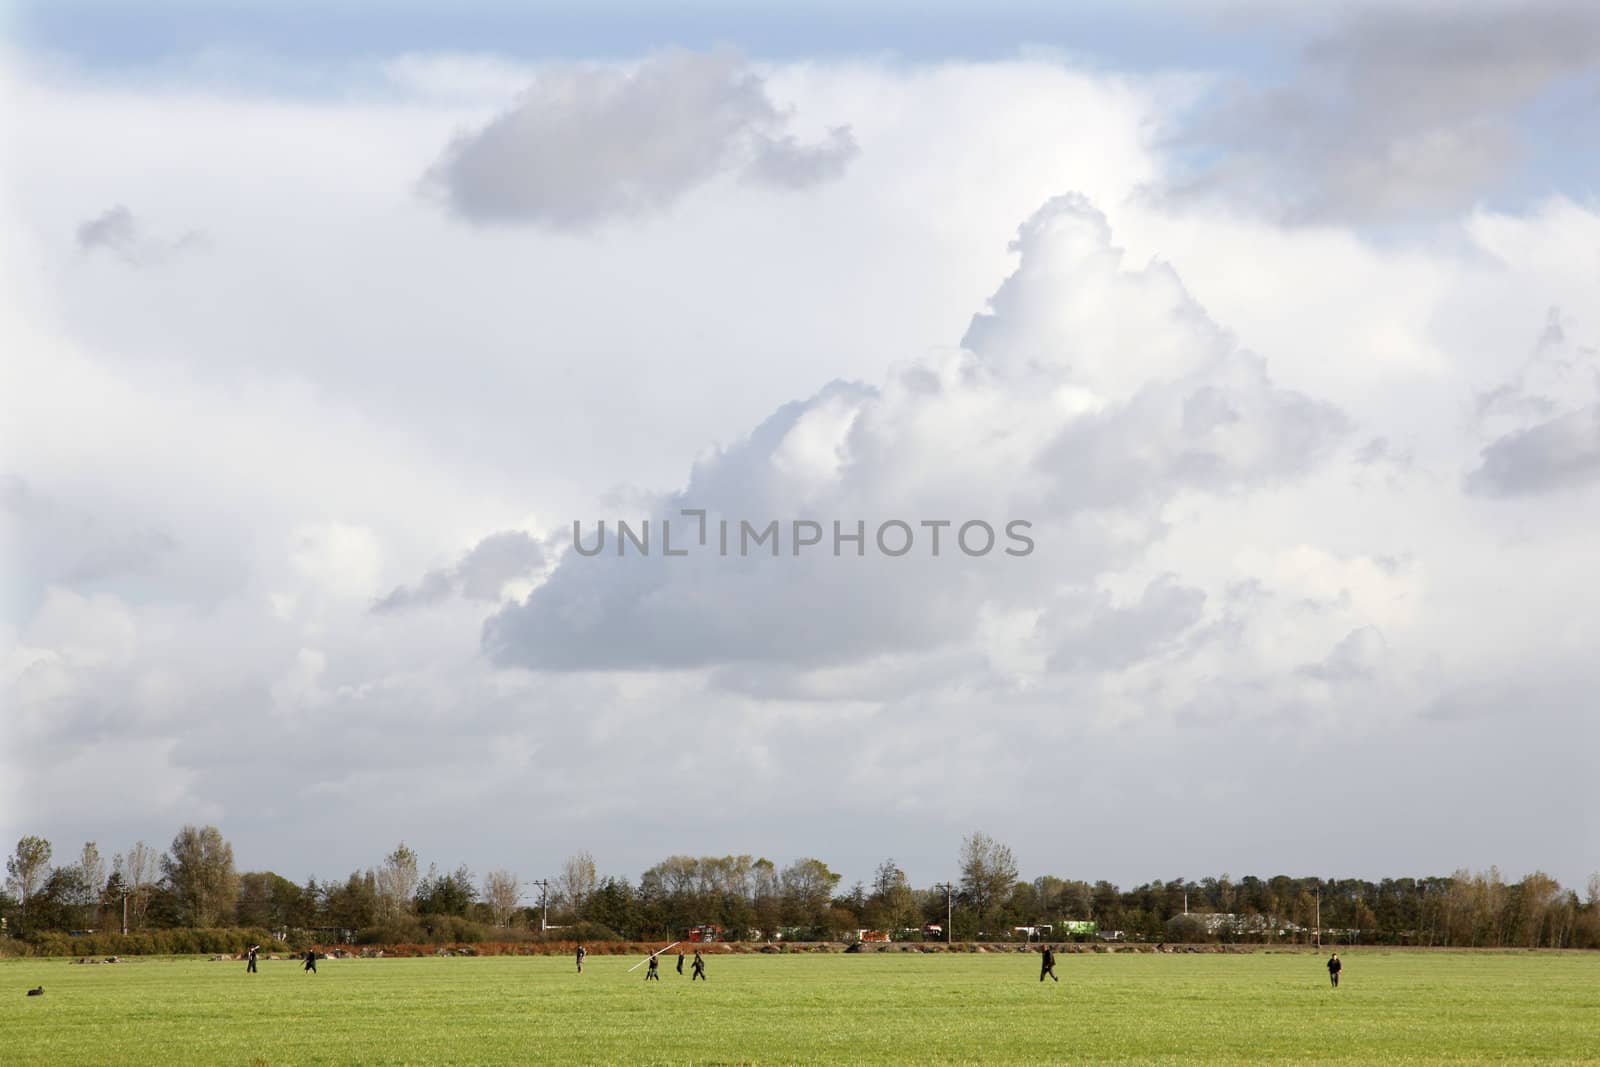 hunters in a meadow in the Netherlands under a cloudy sky